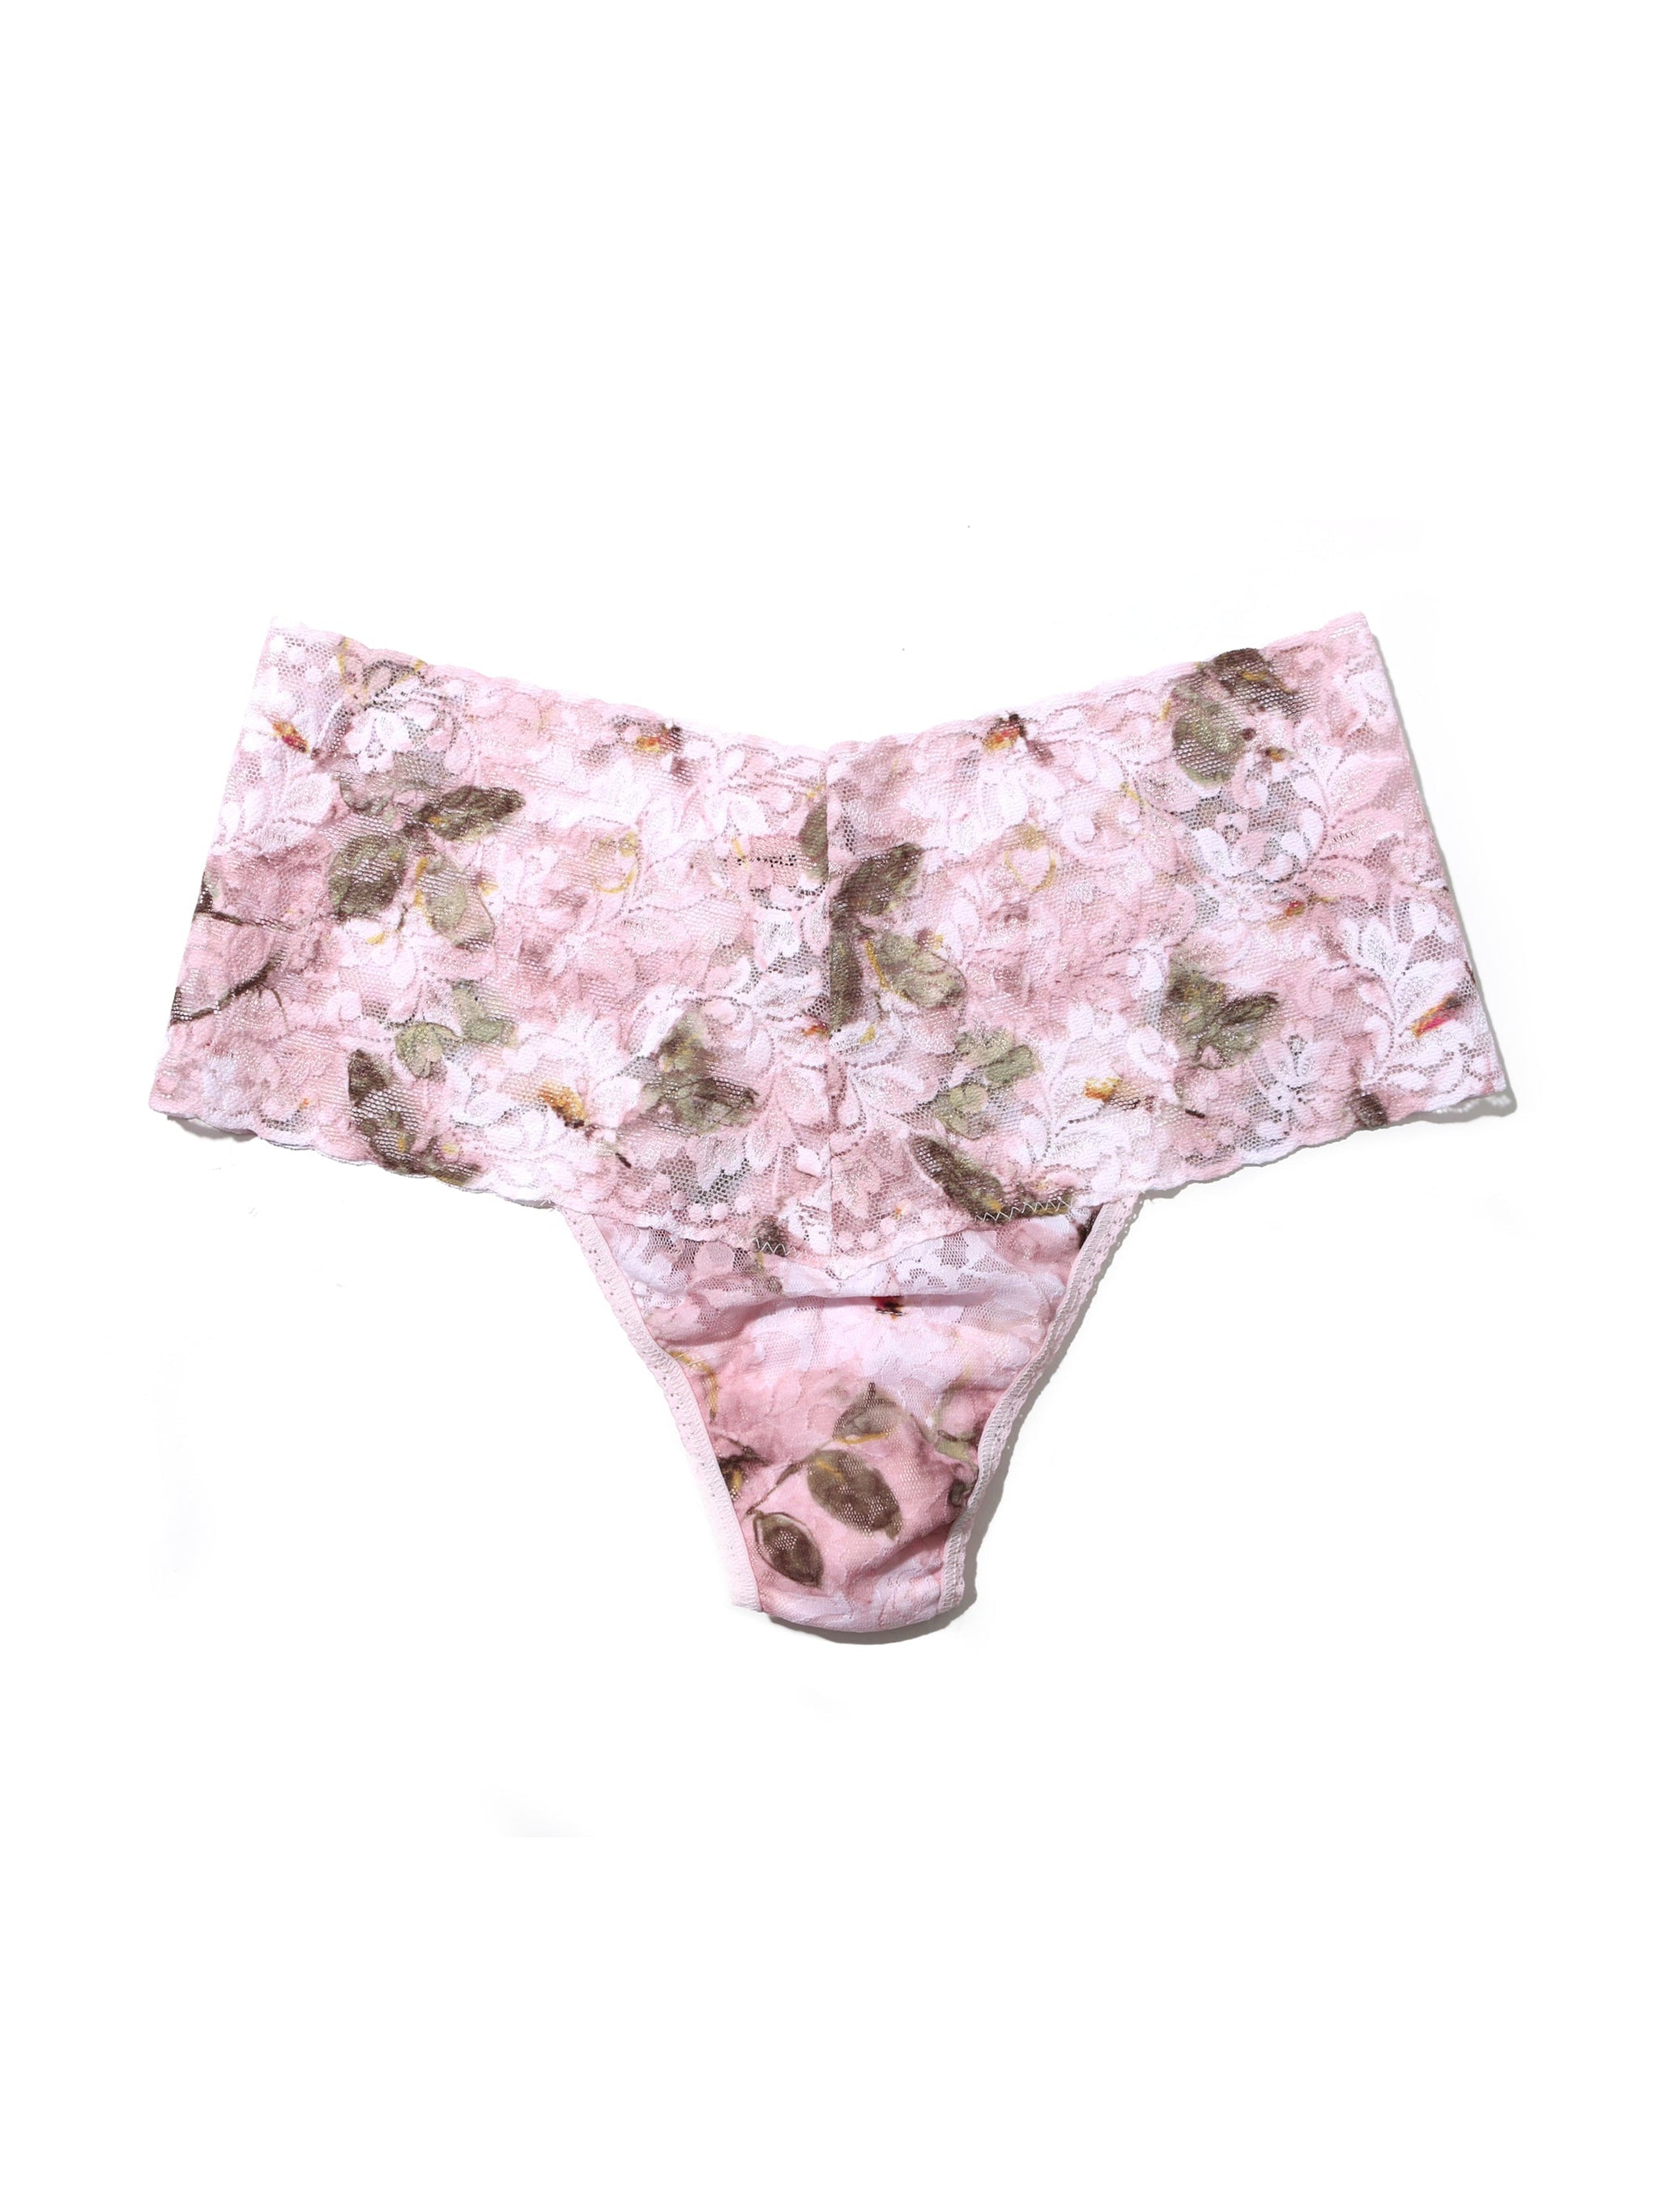 Printed Retro Lace Thong Antique Lily Sale